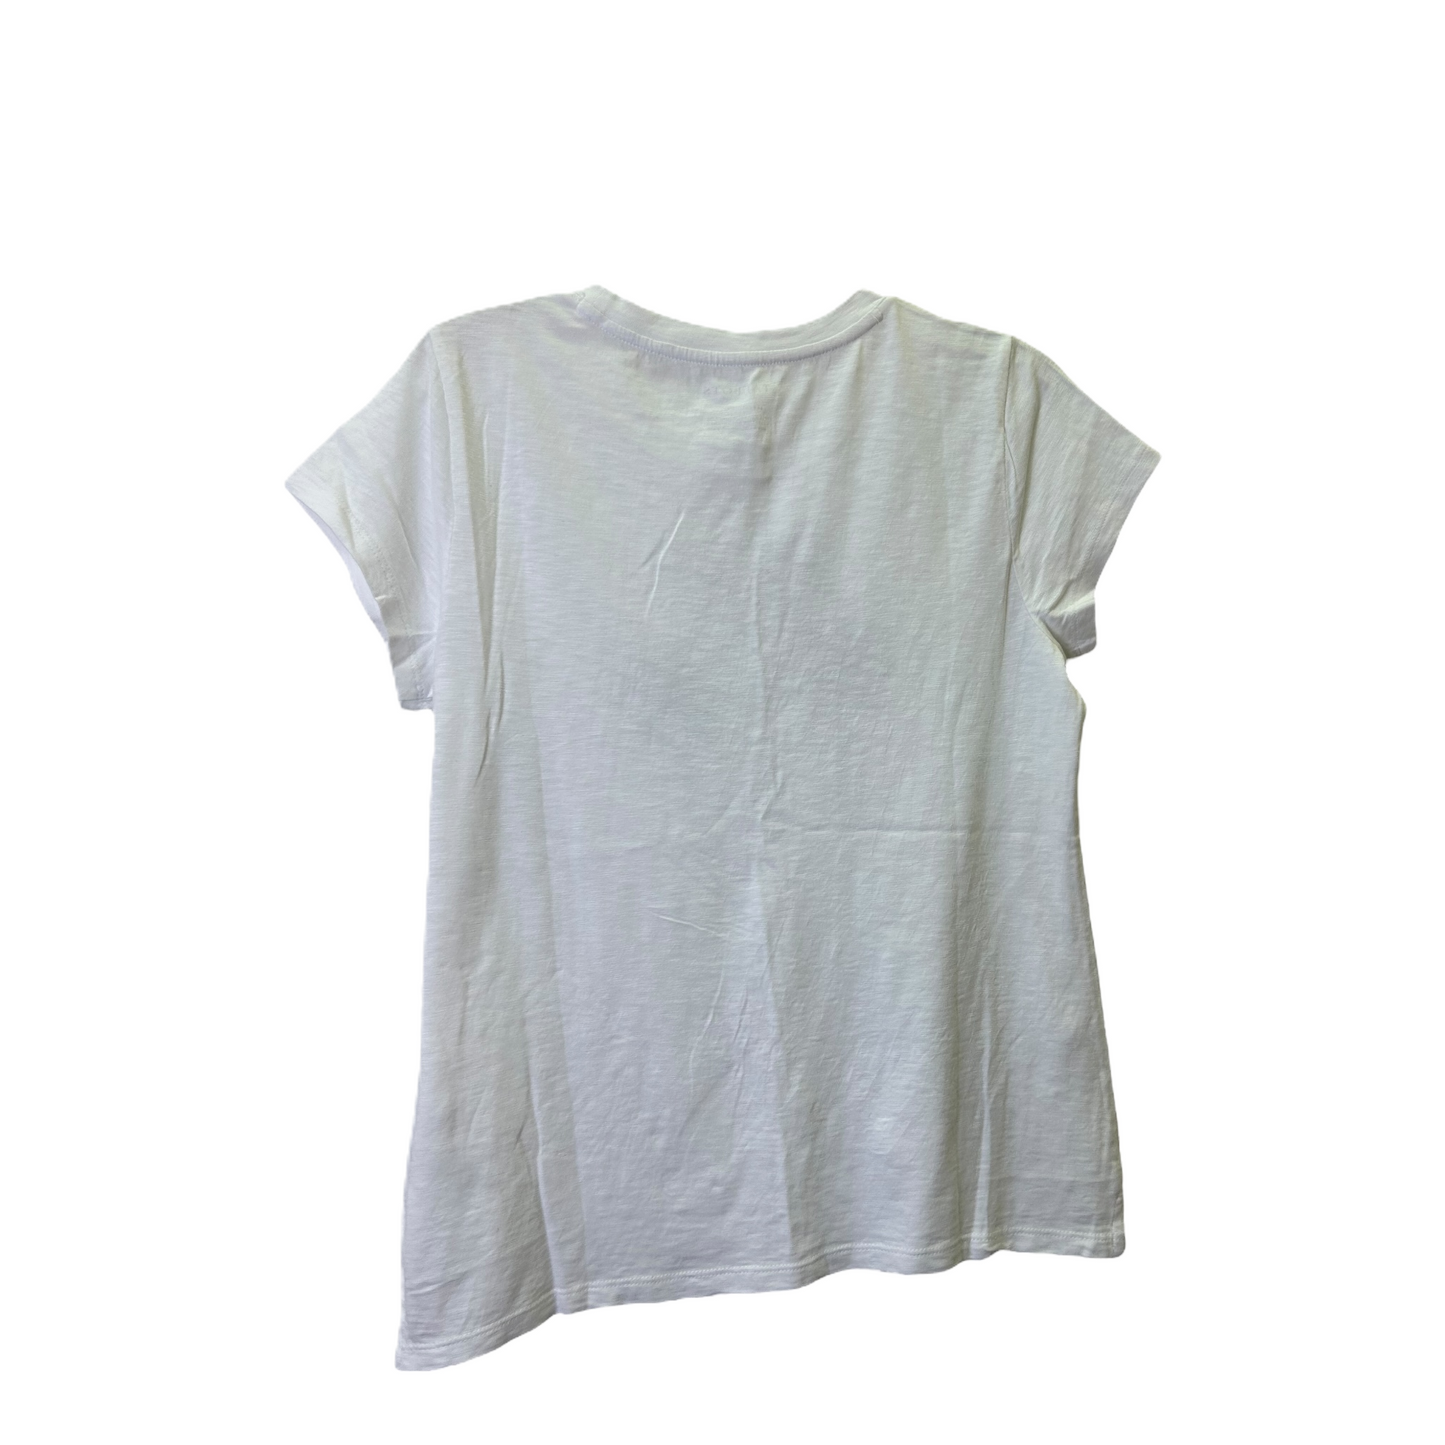 White Top Short Sleeve Basic By Talbots, Size: S